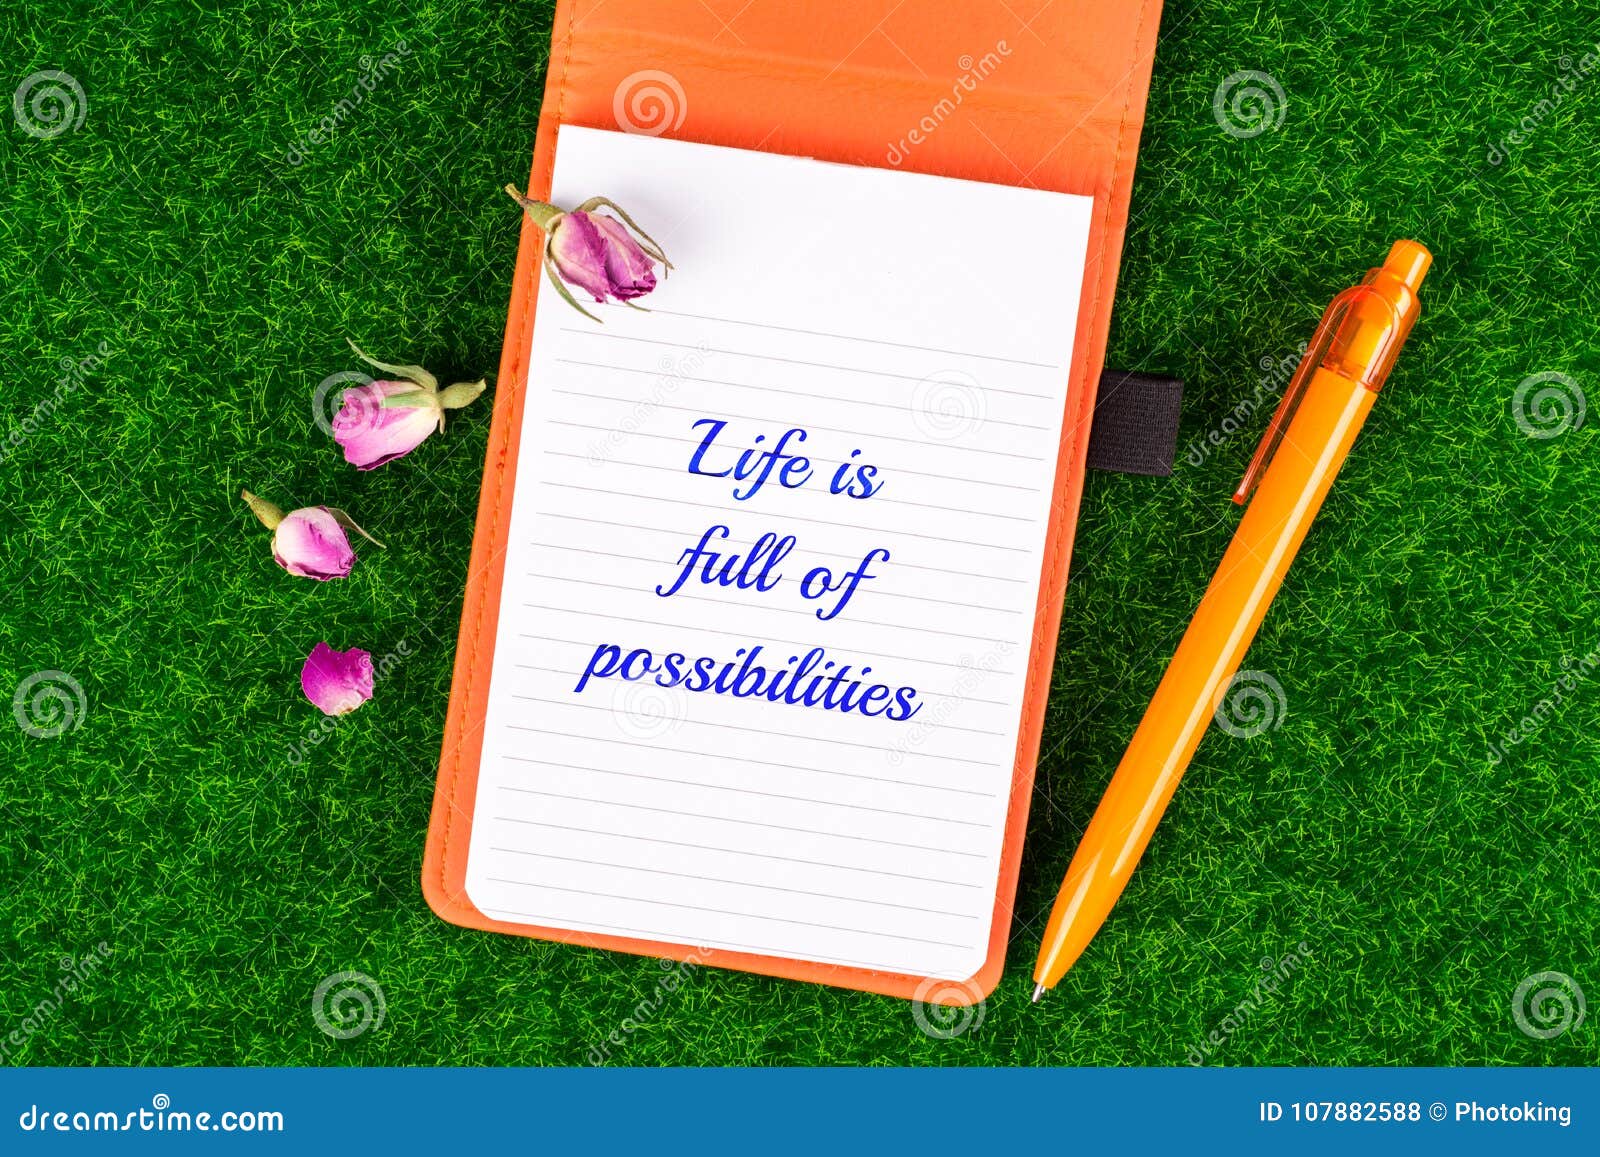 life is full of possibilities